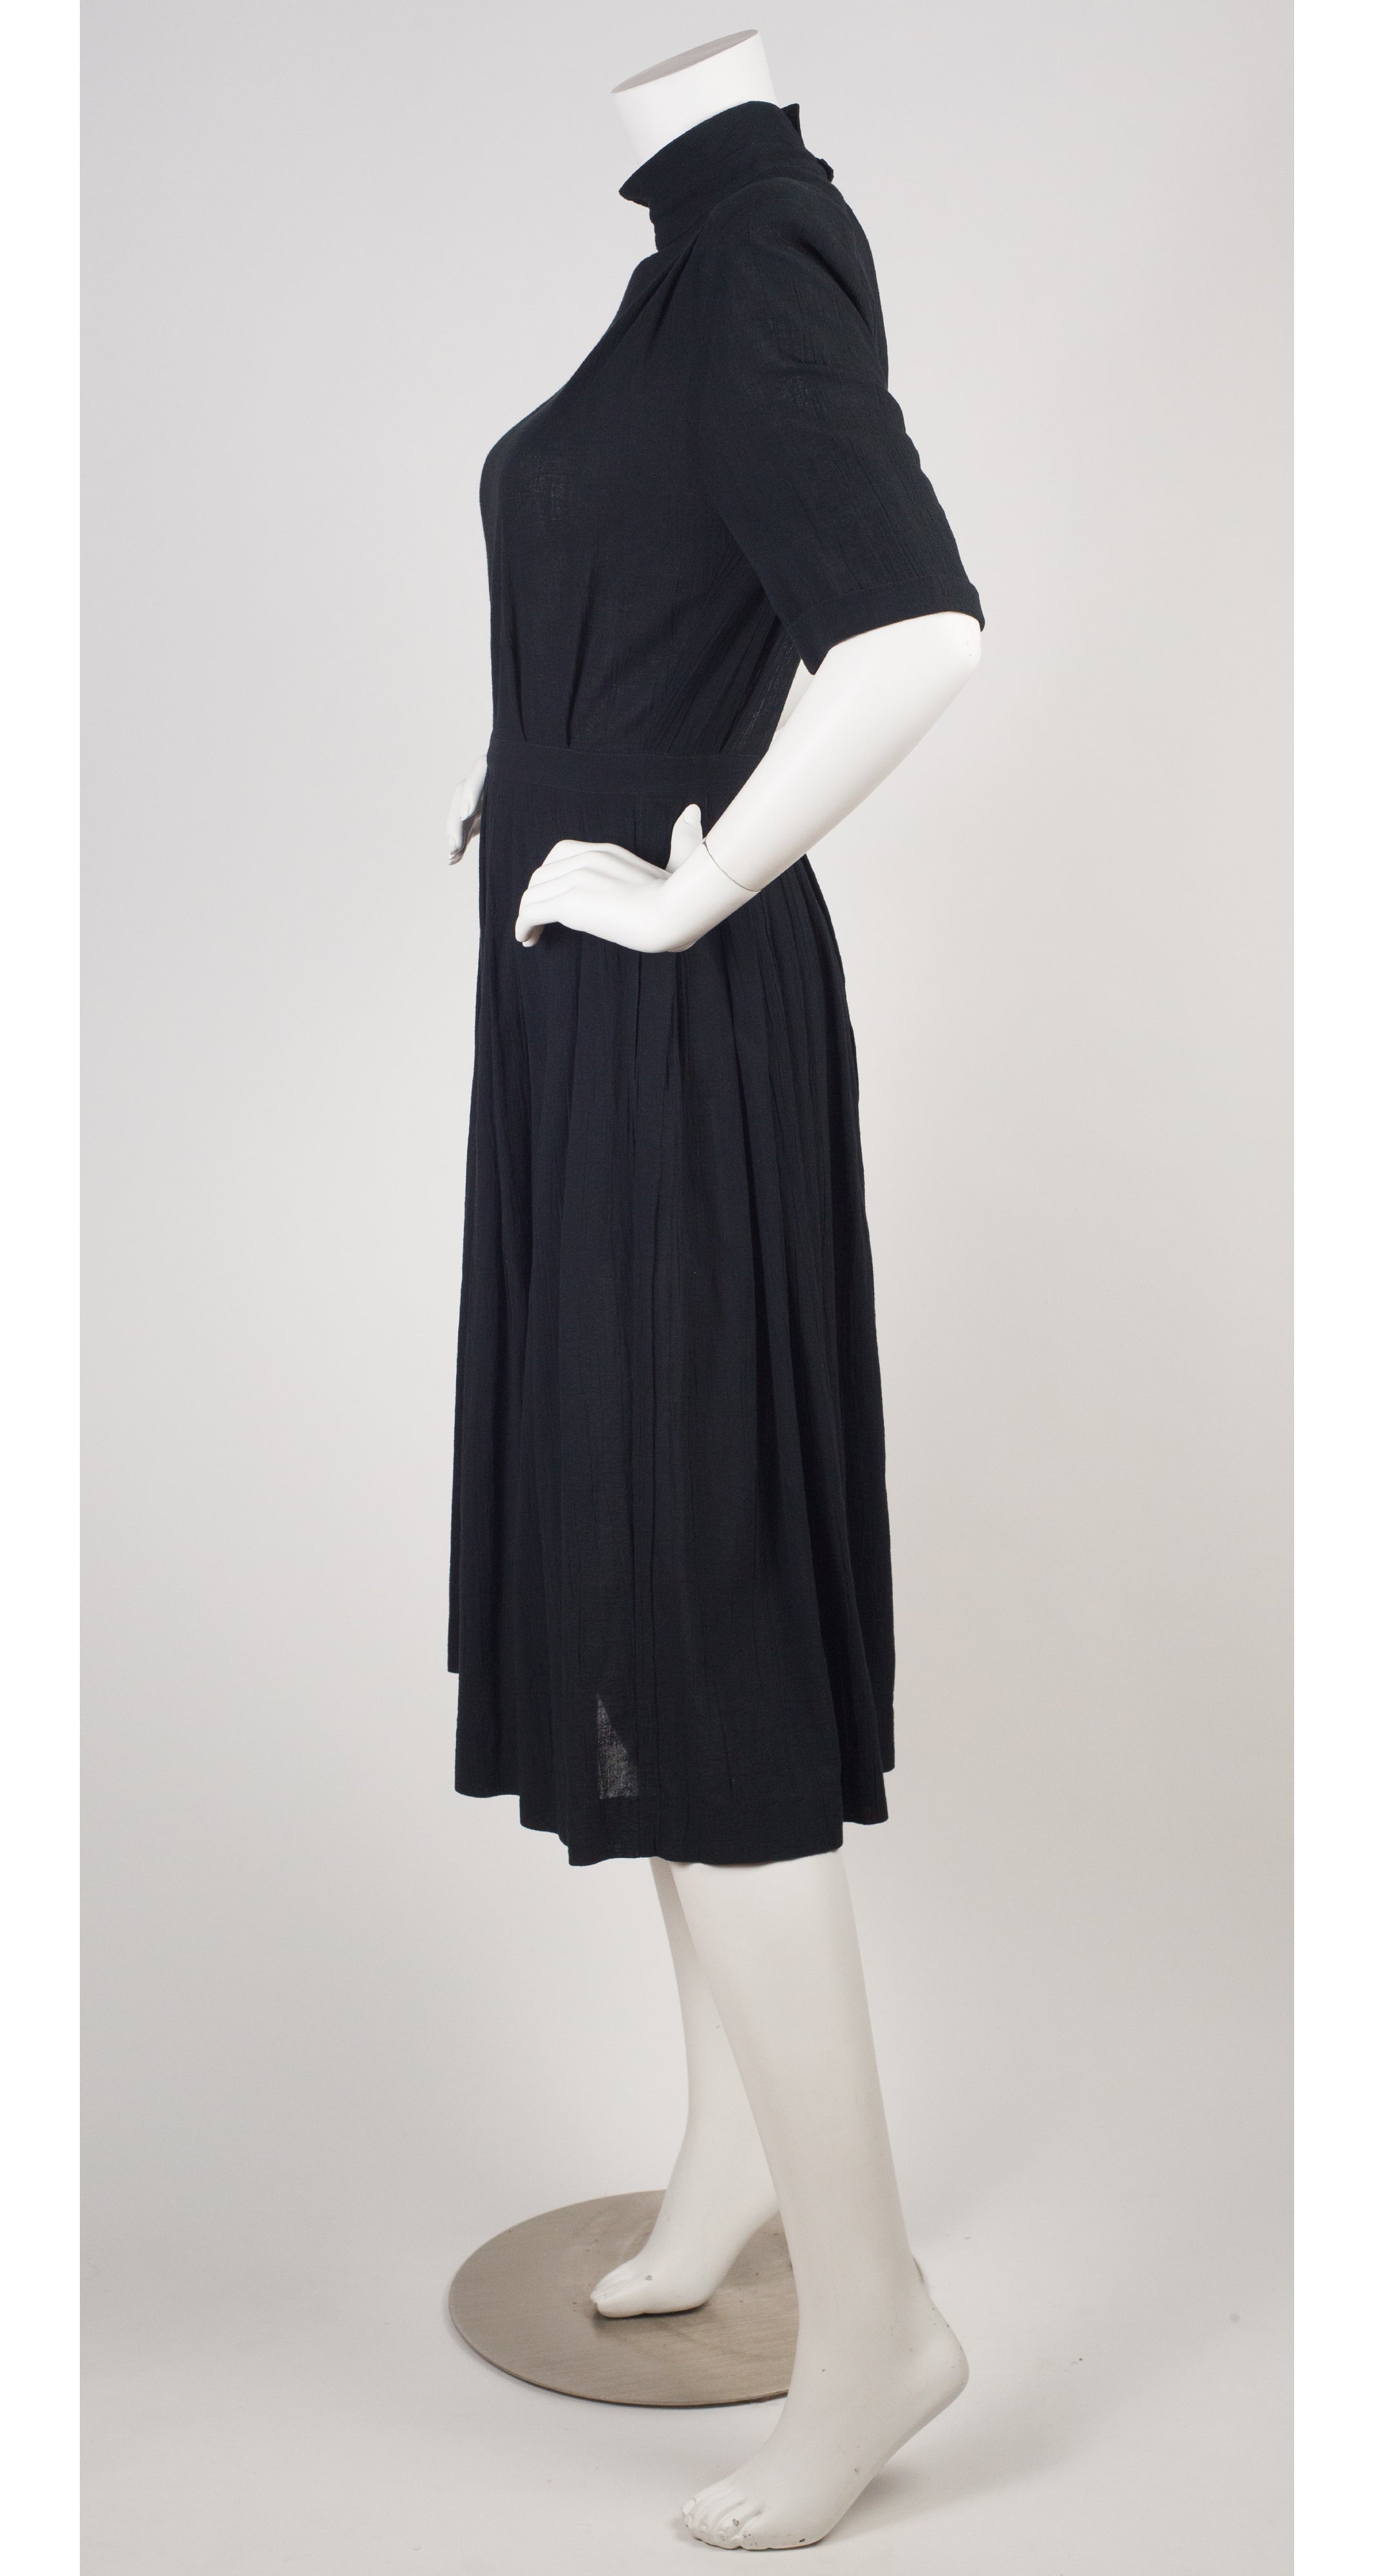 1980s Black Cotton Pleated Backless Dress